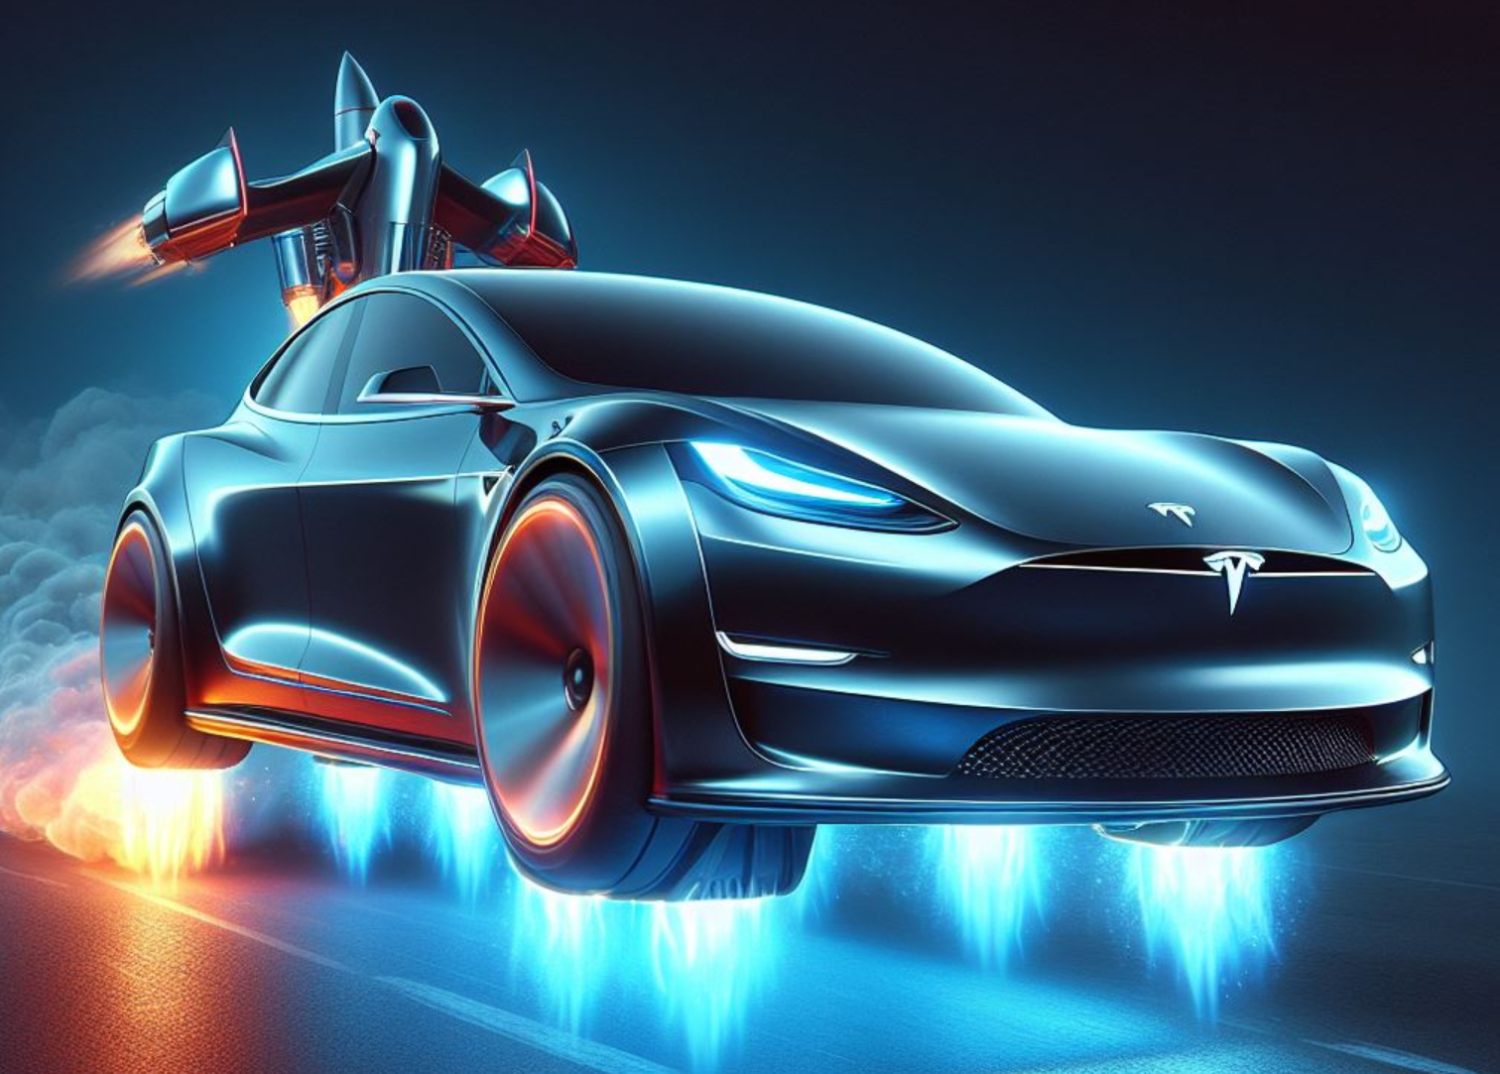 Tesla’s upcoming car, which has faced significant delays, will feature cutting-edge ‘rocket technology’ upon its release